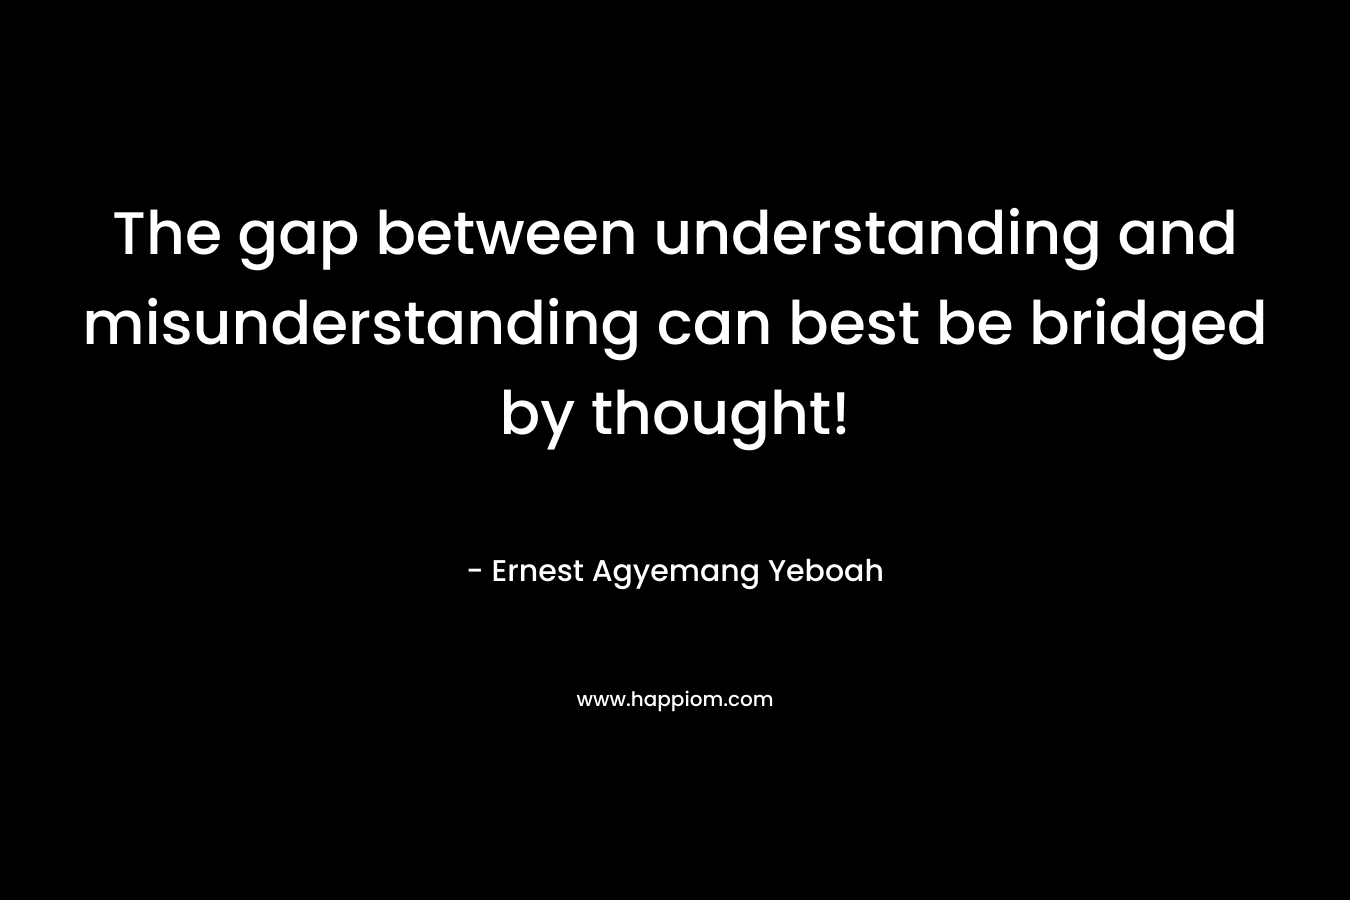 The gap between understanding and misunderstanding can best be bridged by thought! – Ernest Agyemang Yeboah